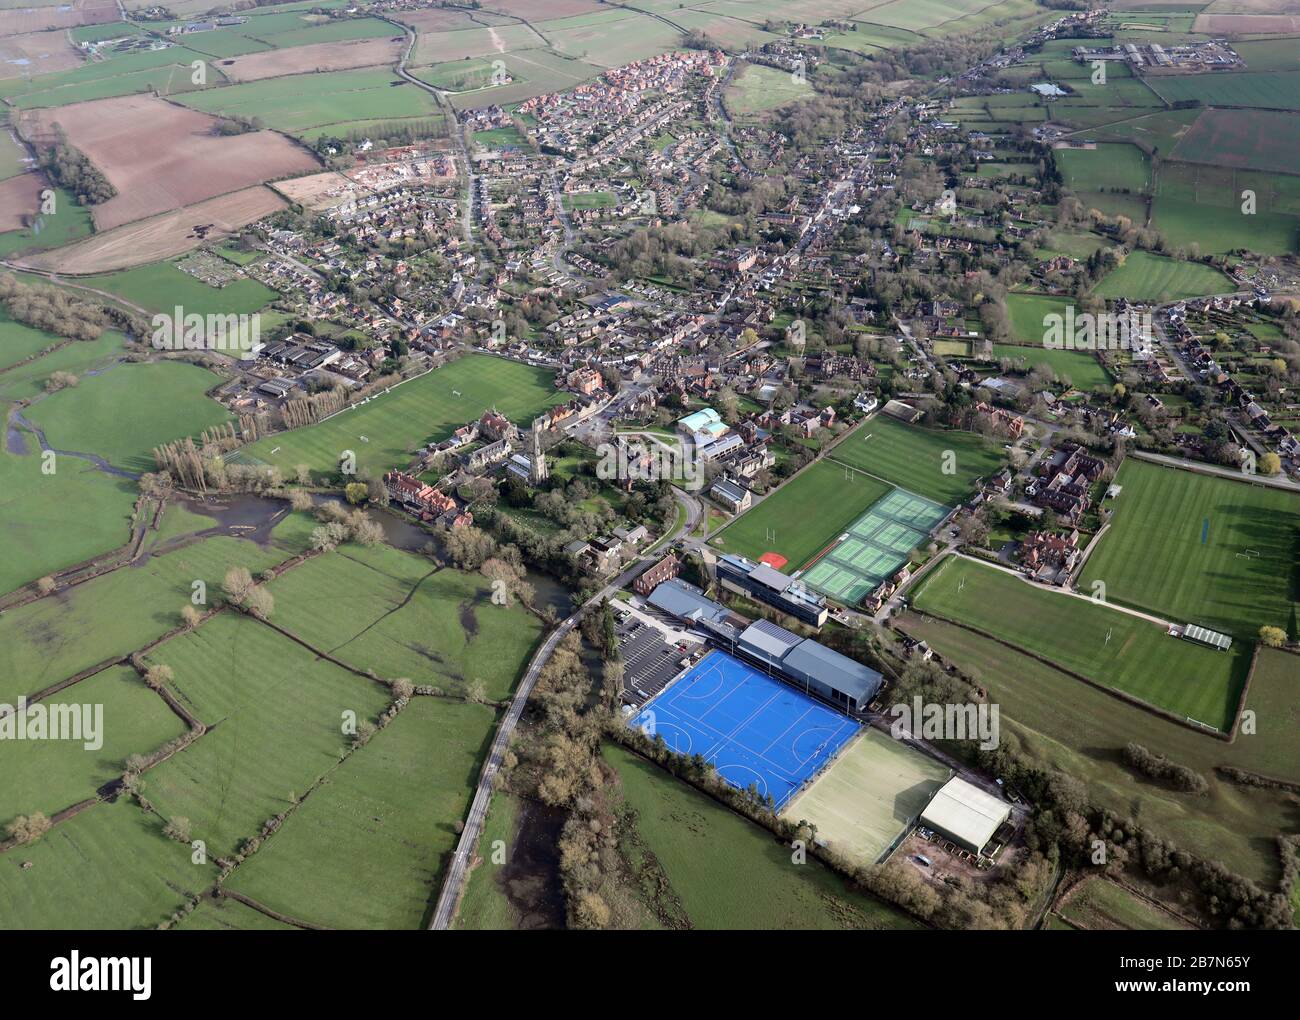 aerial view of Repton village near Derby, with Repton Hockey Club (blue pitch in foreground) & Repton School prominent Stock Photo